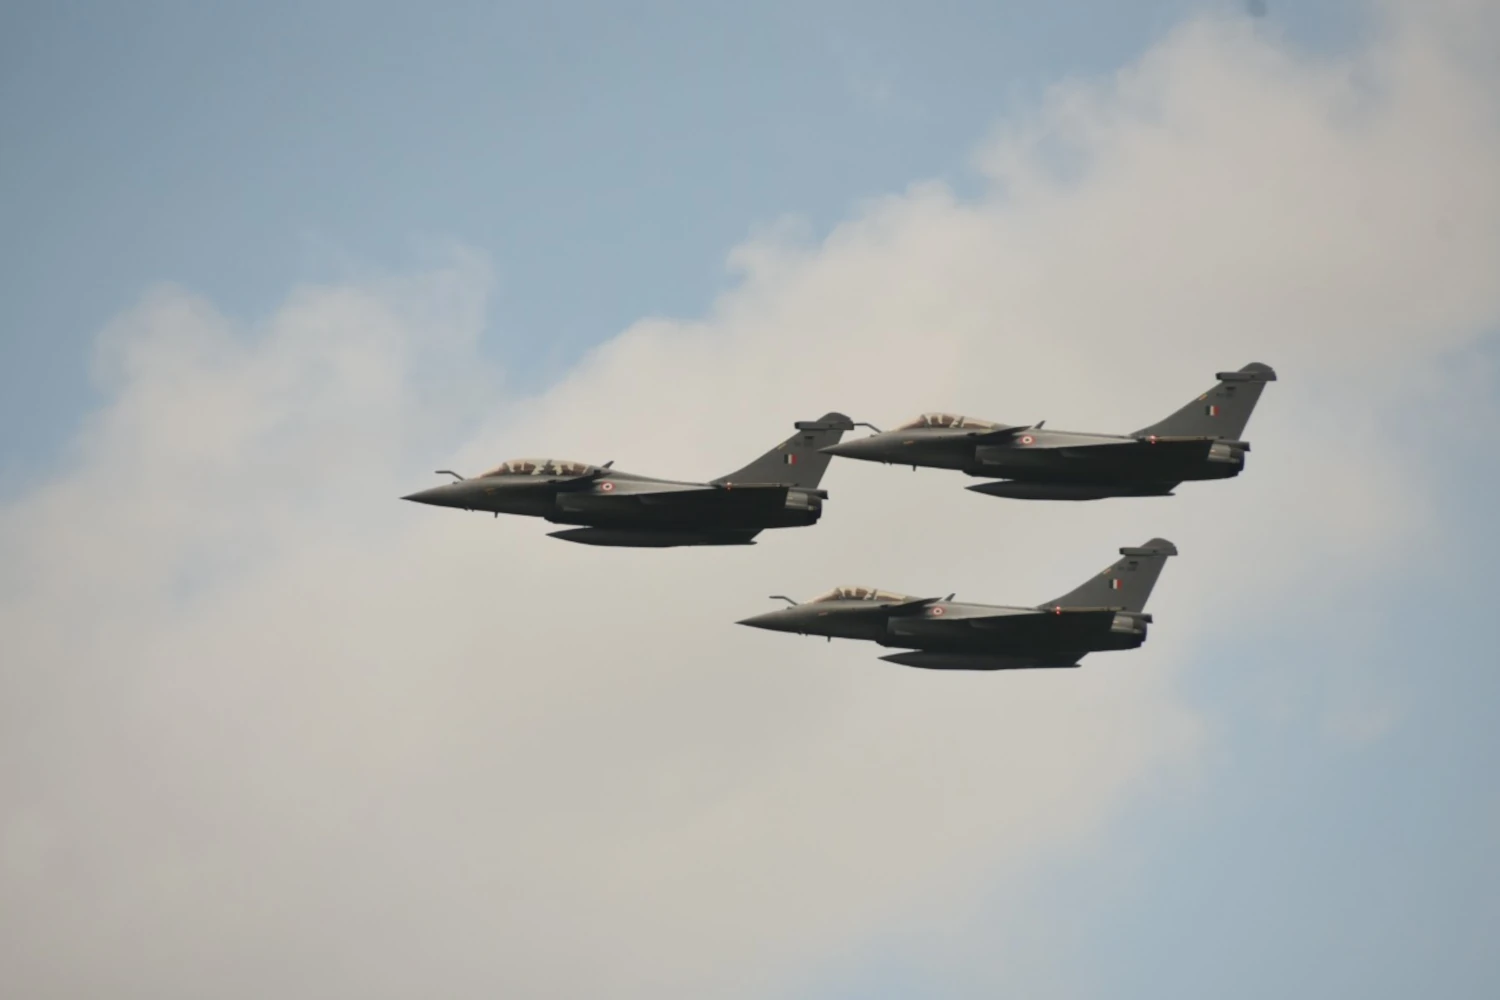 Rafale aircraft flypast during induction ceremony at Air Force station Hasimara on 28 Jul 21